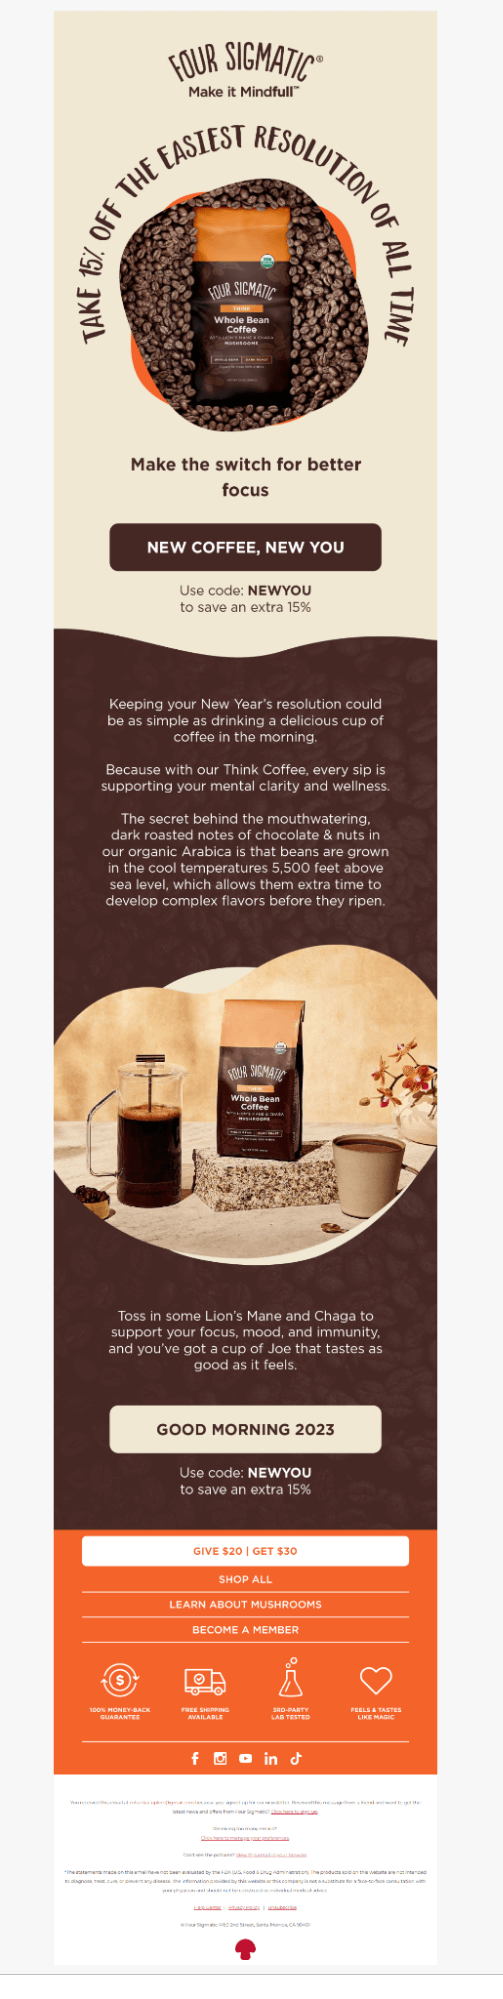 Email by Four Sigmatic